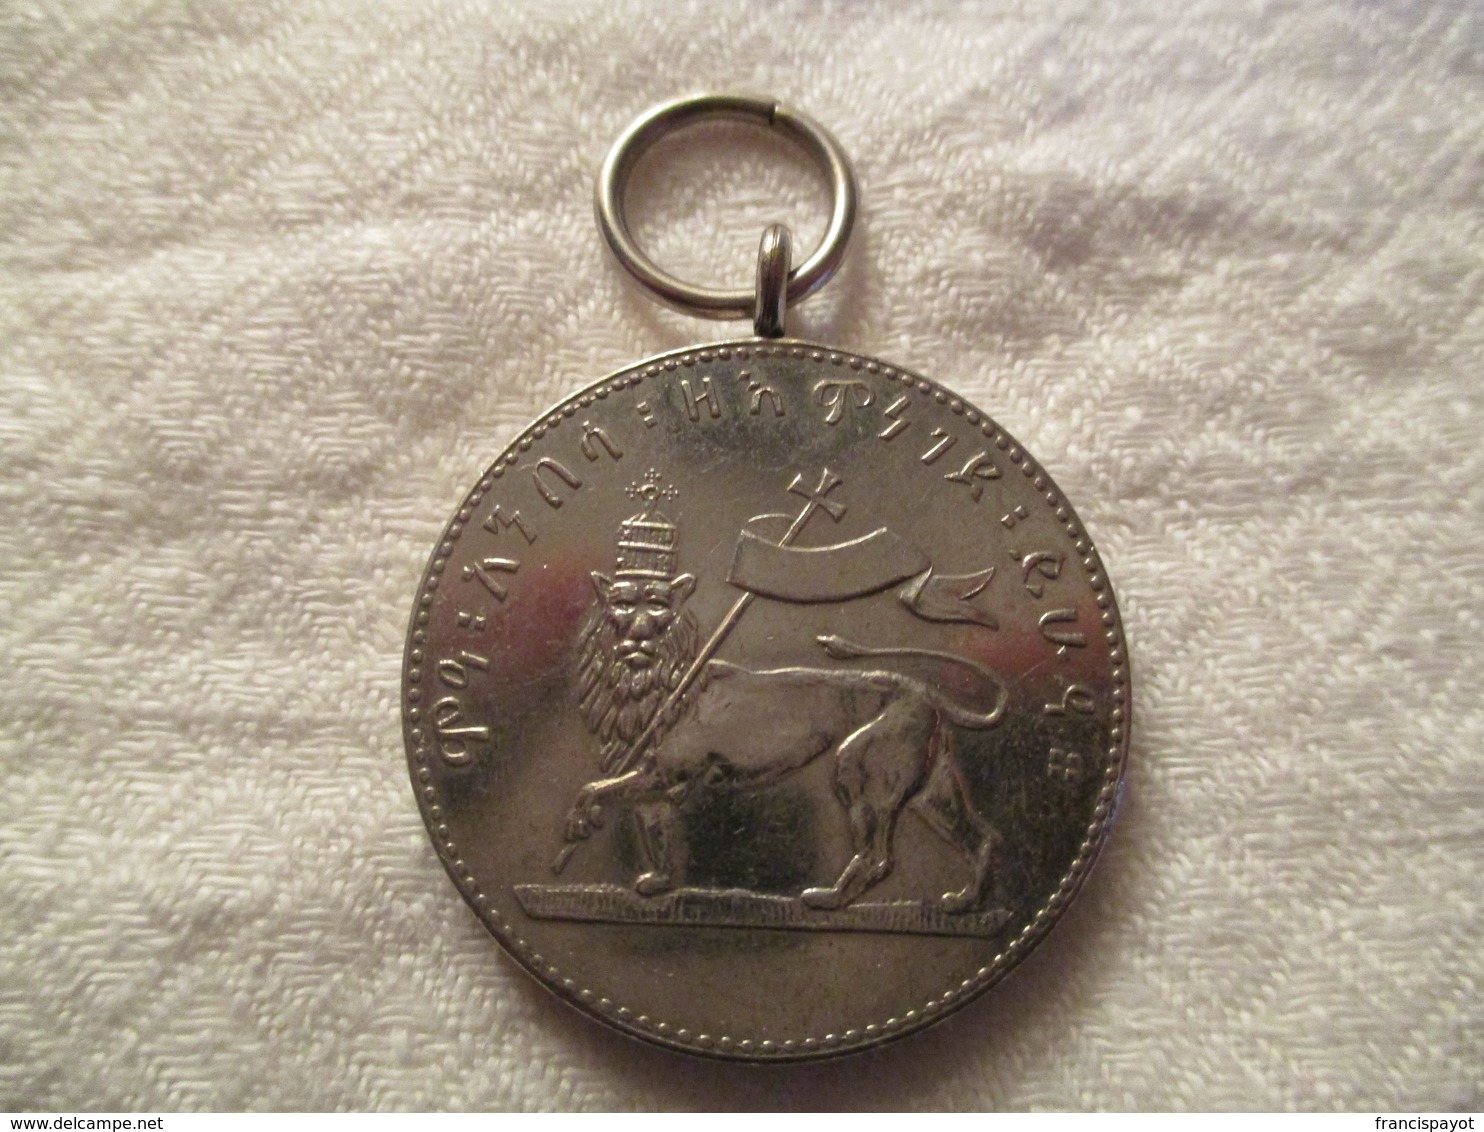 Ethiopia: Menelik Medal For Civil And Military Service - Royal / Of Nobility